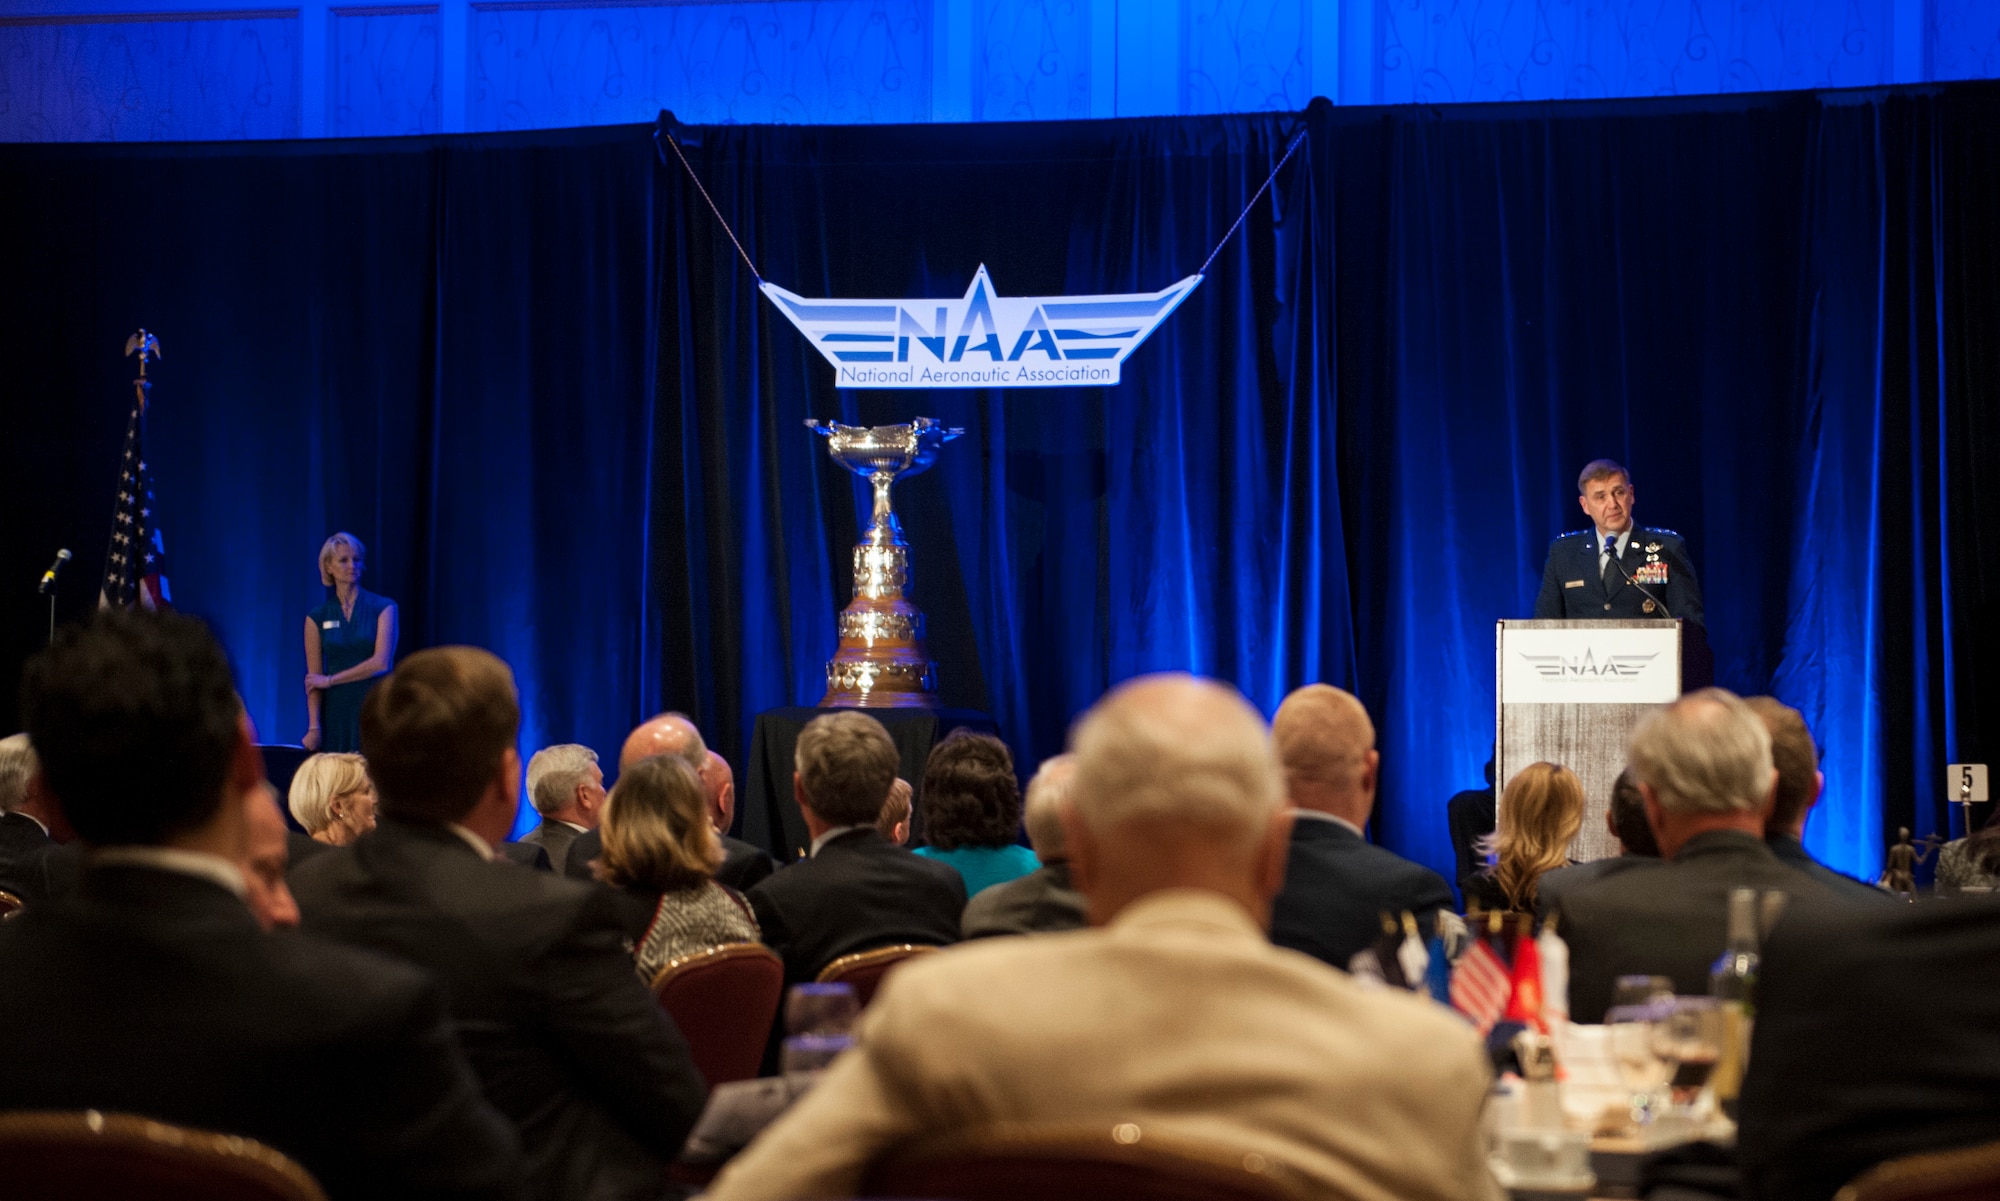 Air Force Assistant Vice Chief of Staff Lt. Gen. Stephen Hoog, gives remarks during the Mackay Trophy presentation, at Arlington, Va., Nov. 12, 2013. The trophy is awarded for the "most meritorious flight of the year" by an Air Force person, persons, or organization. (U.S. Air Force photo/Staff Sgt. Carlin Leslie)